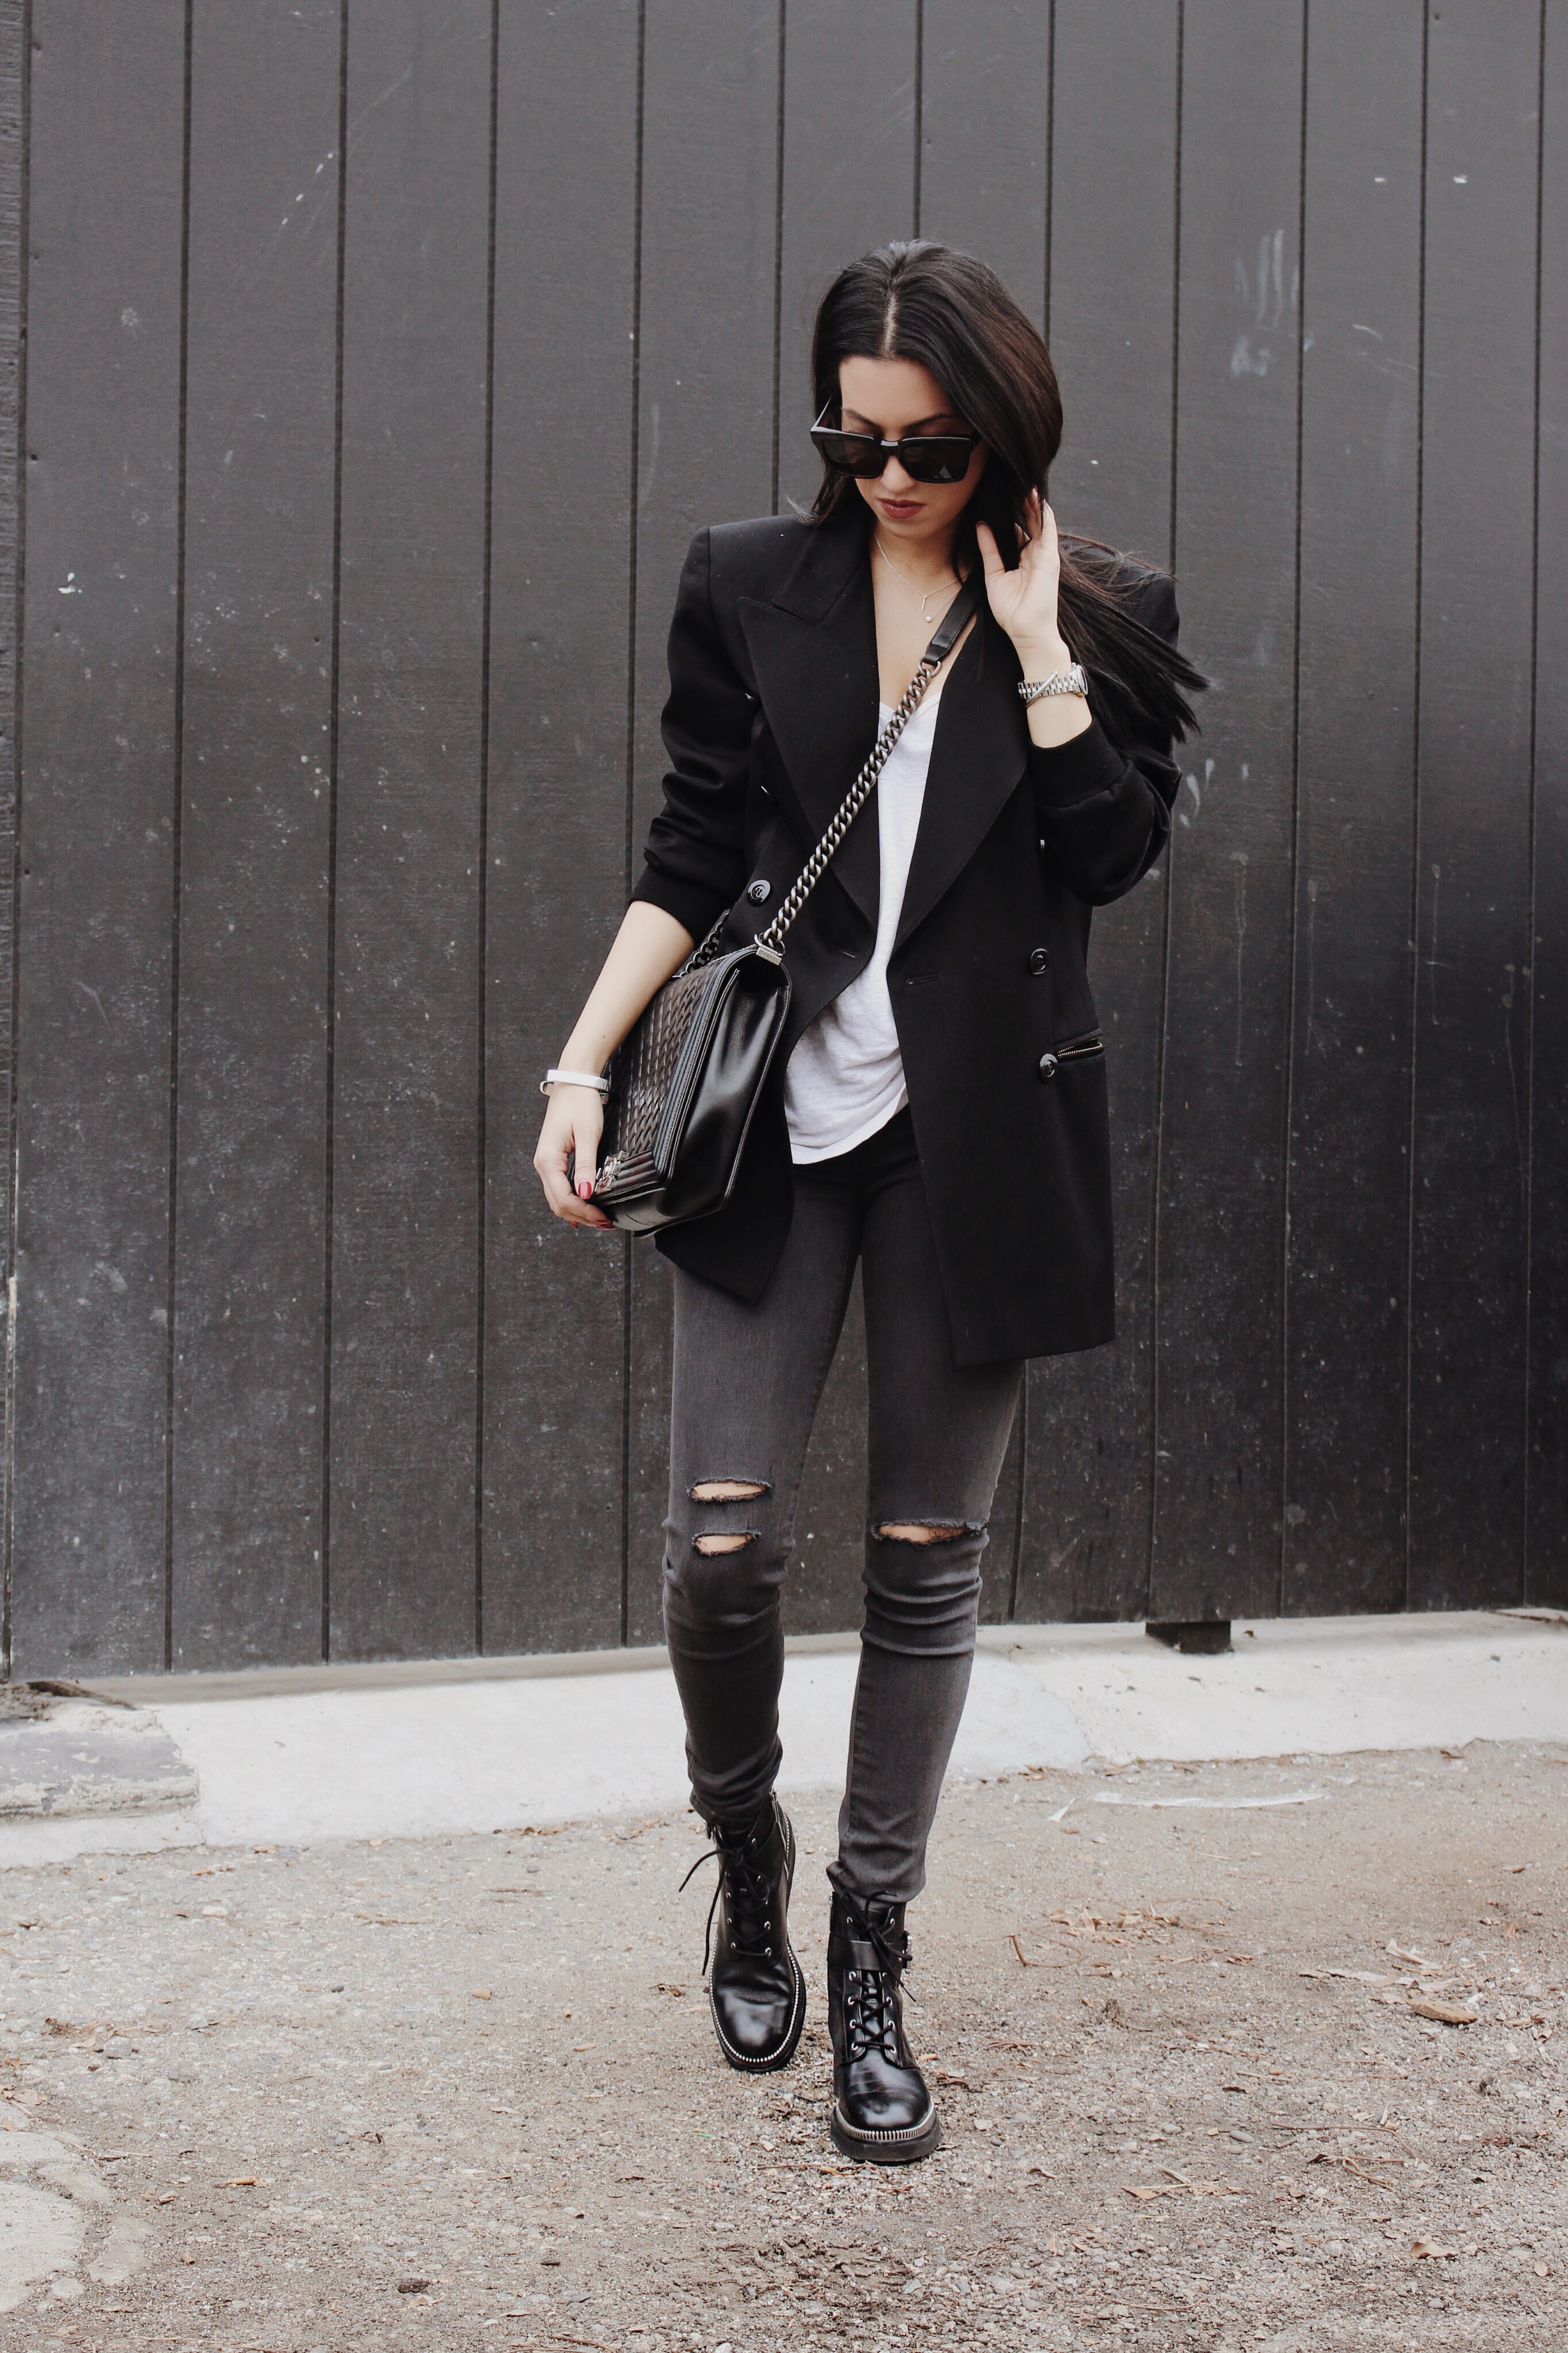 LA blogger Tania Sarin with chanel bag and combat boot